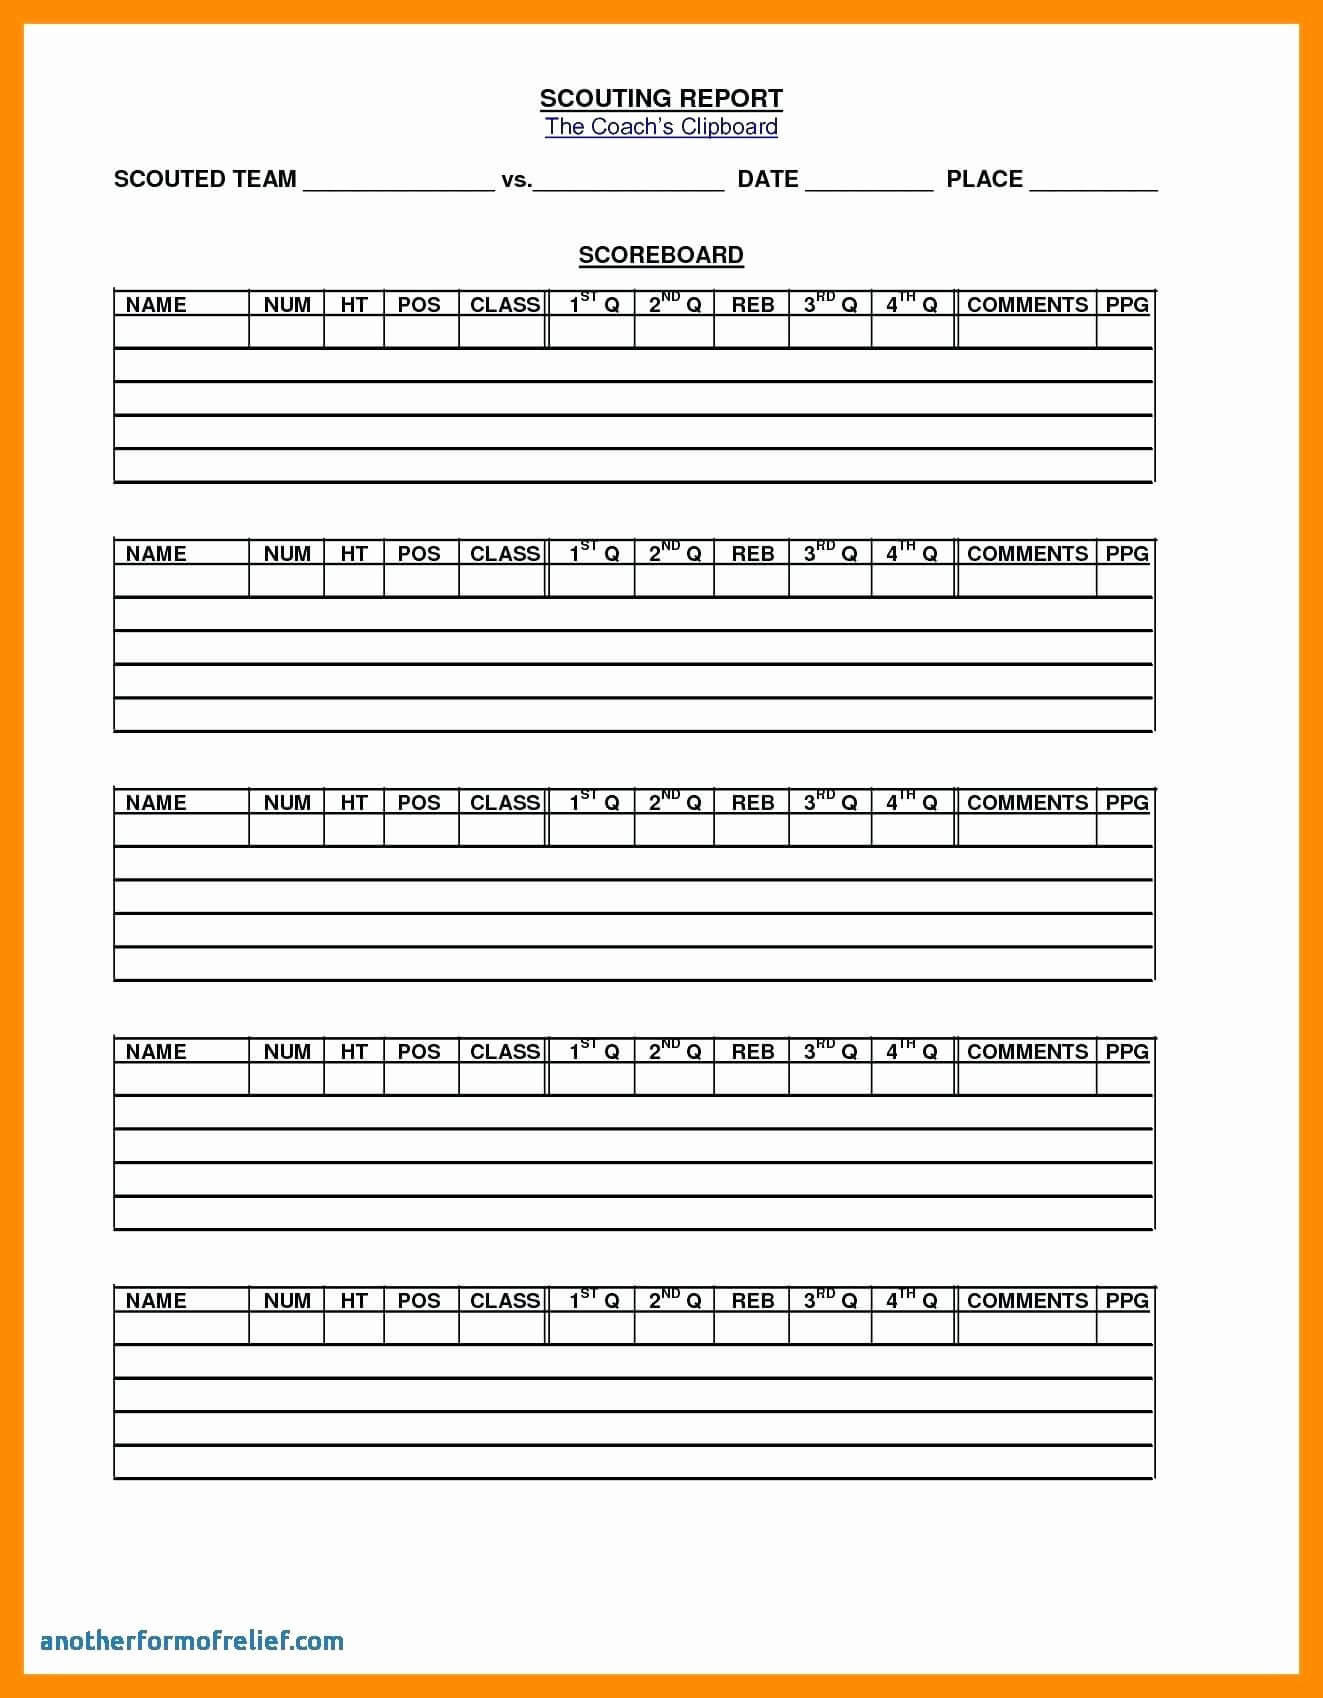 2E6D Basketball Scouting Report Template Sheets Throughout Scouting Report Template Basketball